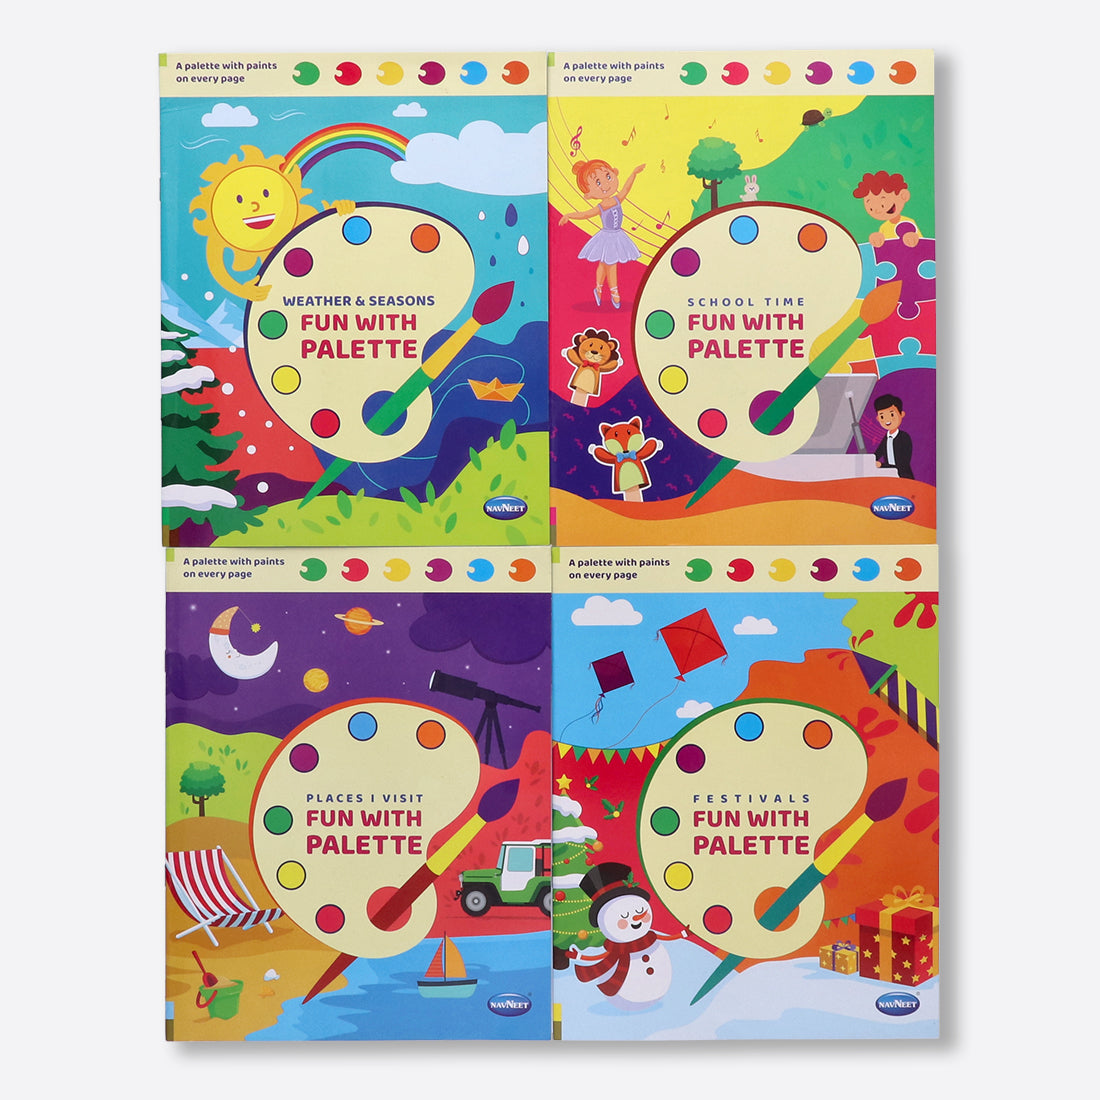 Navneet Fun With Palette Colouring Book - with Magic Colour Palette - Toddler's Painting book - Innovative Book- Festivals, Places I Visit, School Time , Weather & Season - travel fun